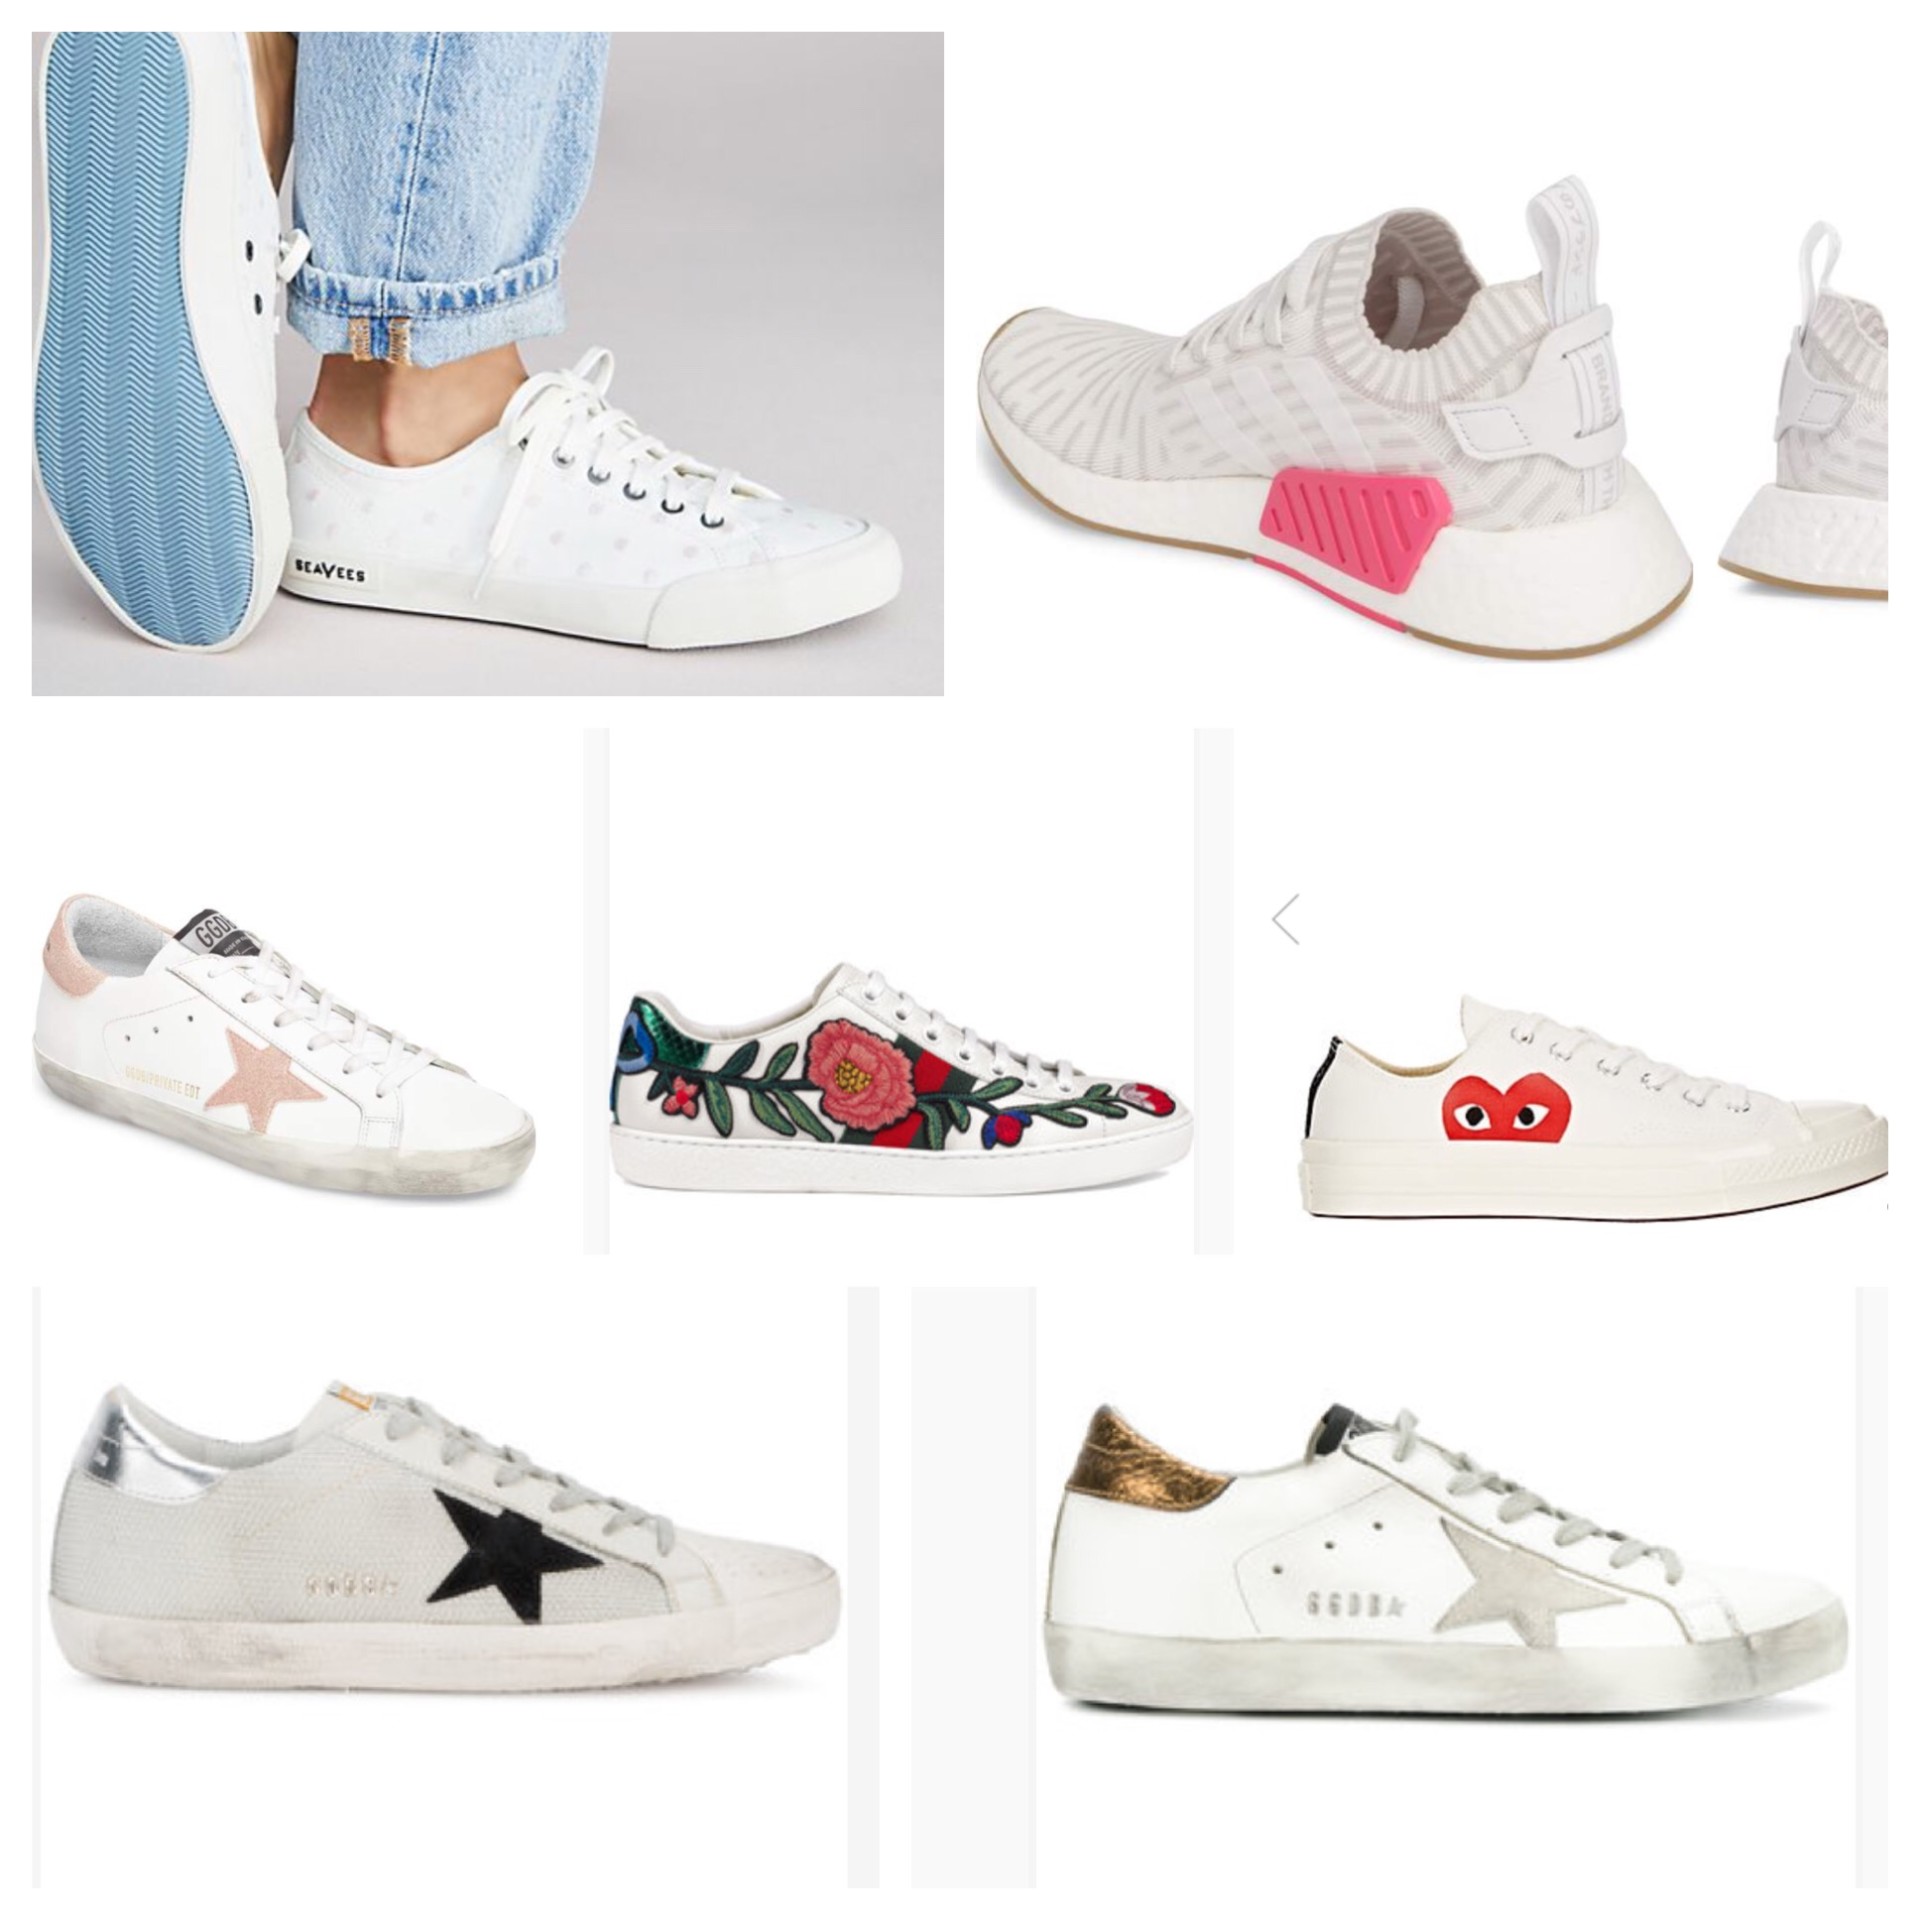 NEW ARRIVALS + WHITE SNEAKERS - Lunchpails and Lipstick